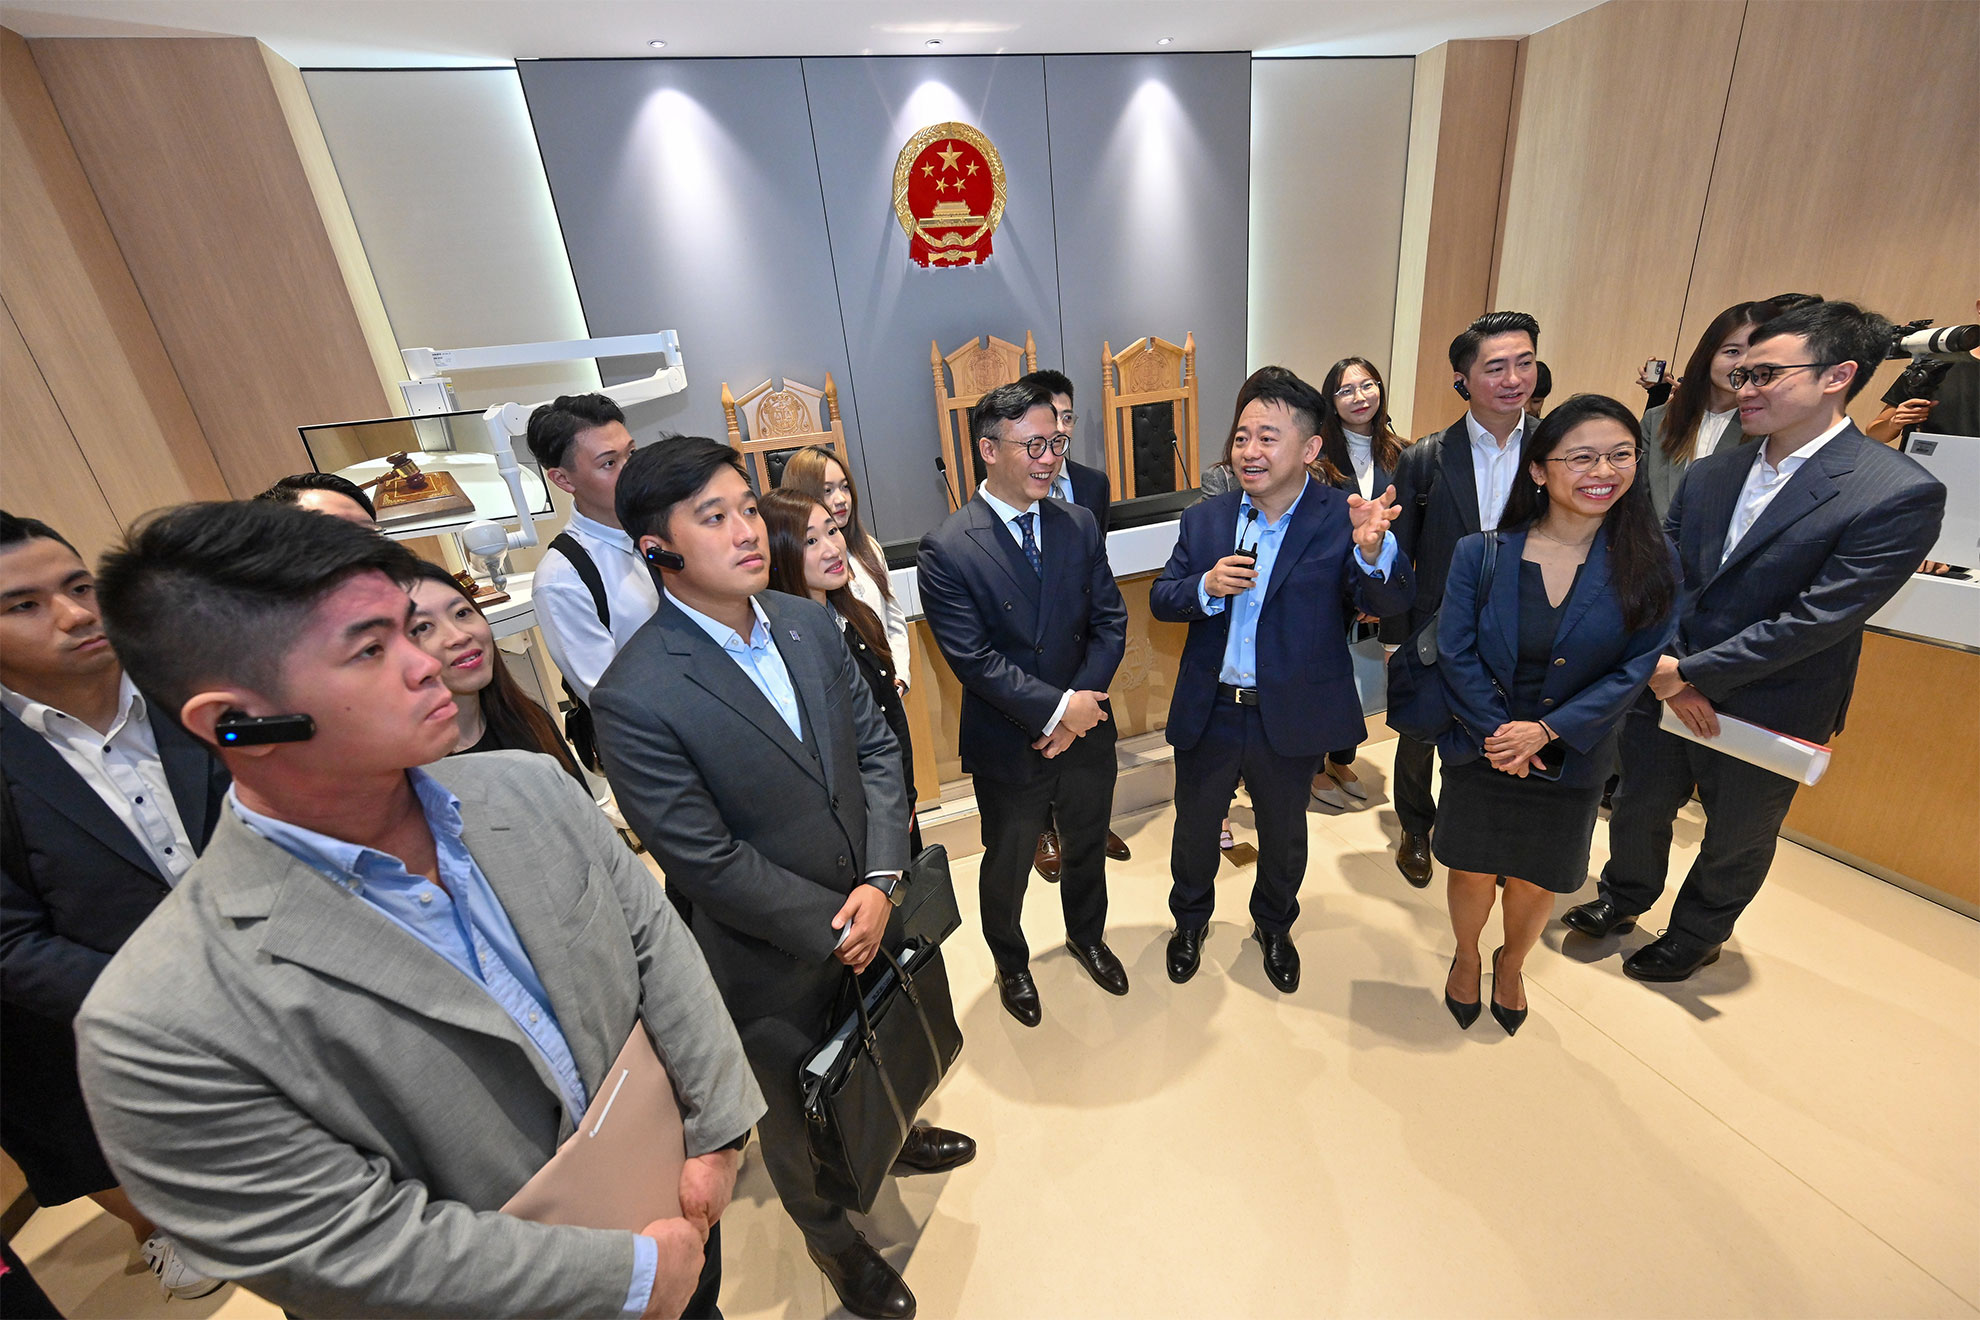 The Deputy Secretary for Justice, Mr Cheung Kwok-kwan, and a delegation of young lawyers led by him today (November 17) finished the first stop, Shenzhen, of their visit to Mainland cities of the Greater Bay Area. Photo shows Mr Cheung (fourth right) and other members of the delegation being briefed by the President of the Shenzhen Qianhai Cooperation Zone People's Court, Mr Bian Fei (third right), during their visit to the court's E-courtroom.